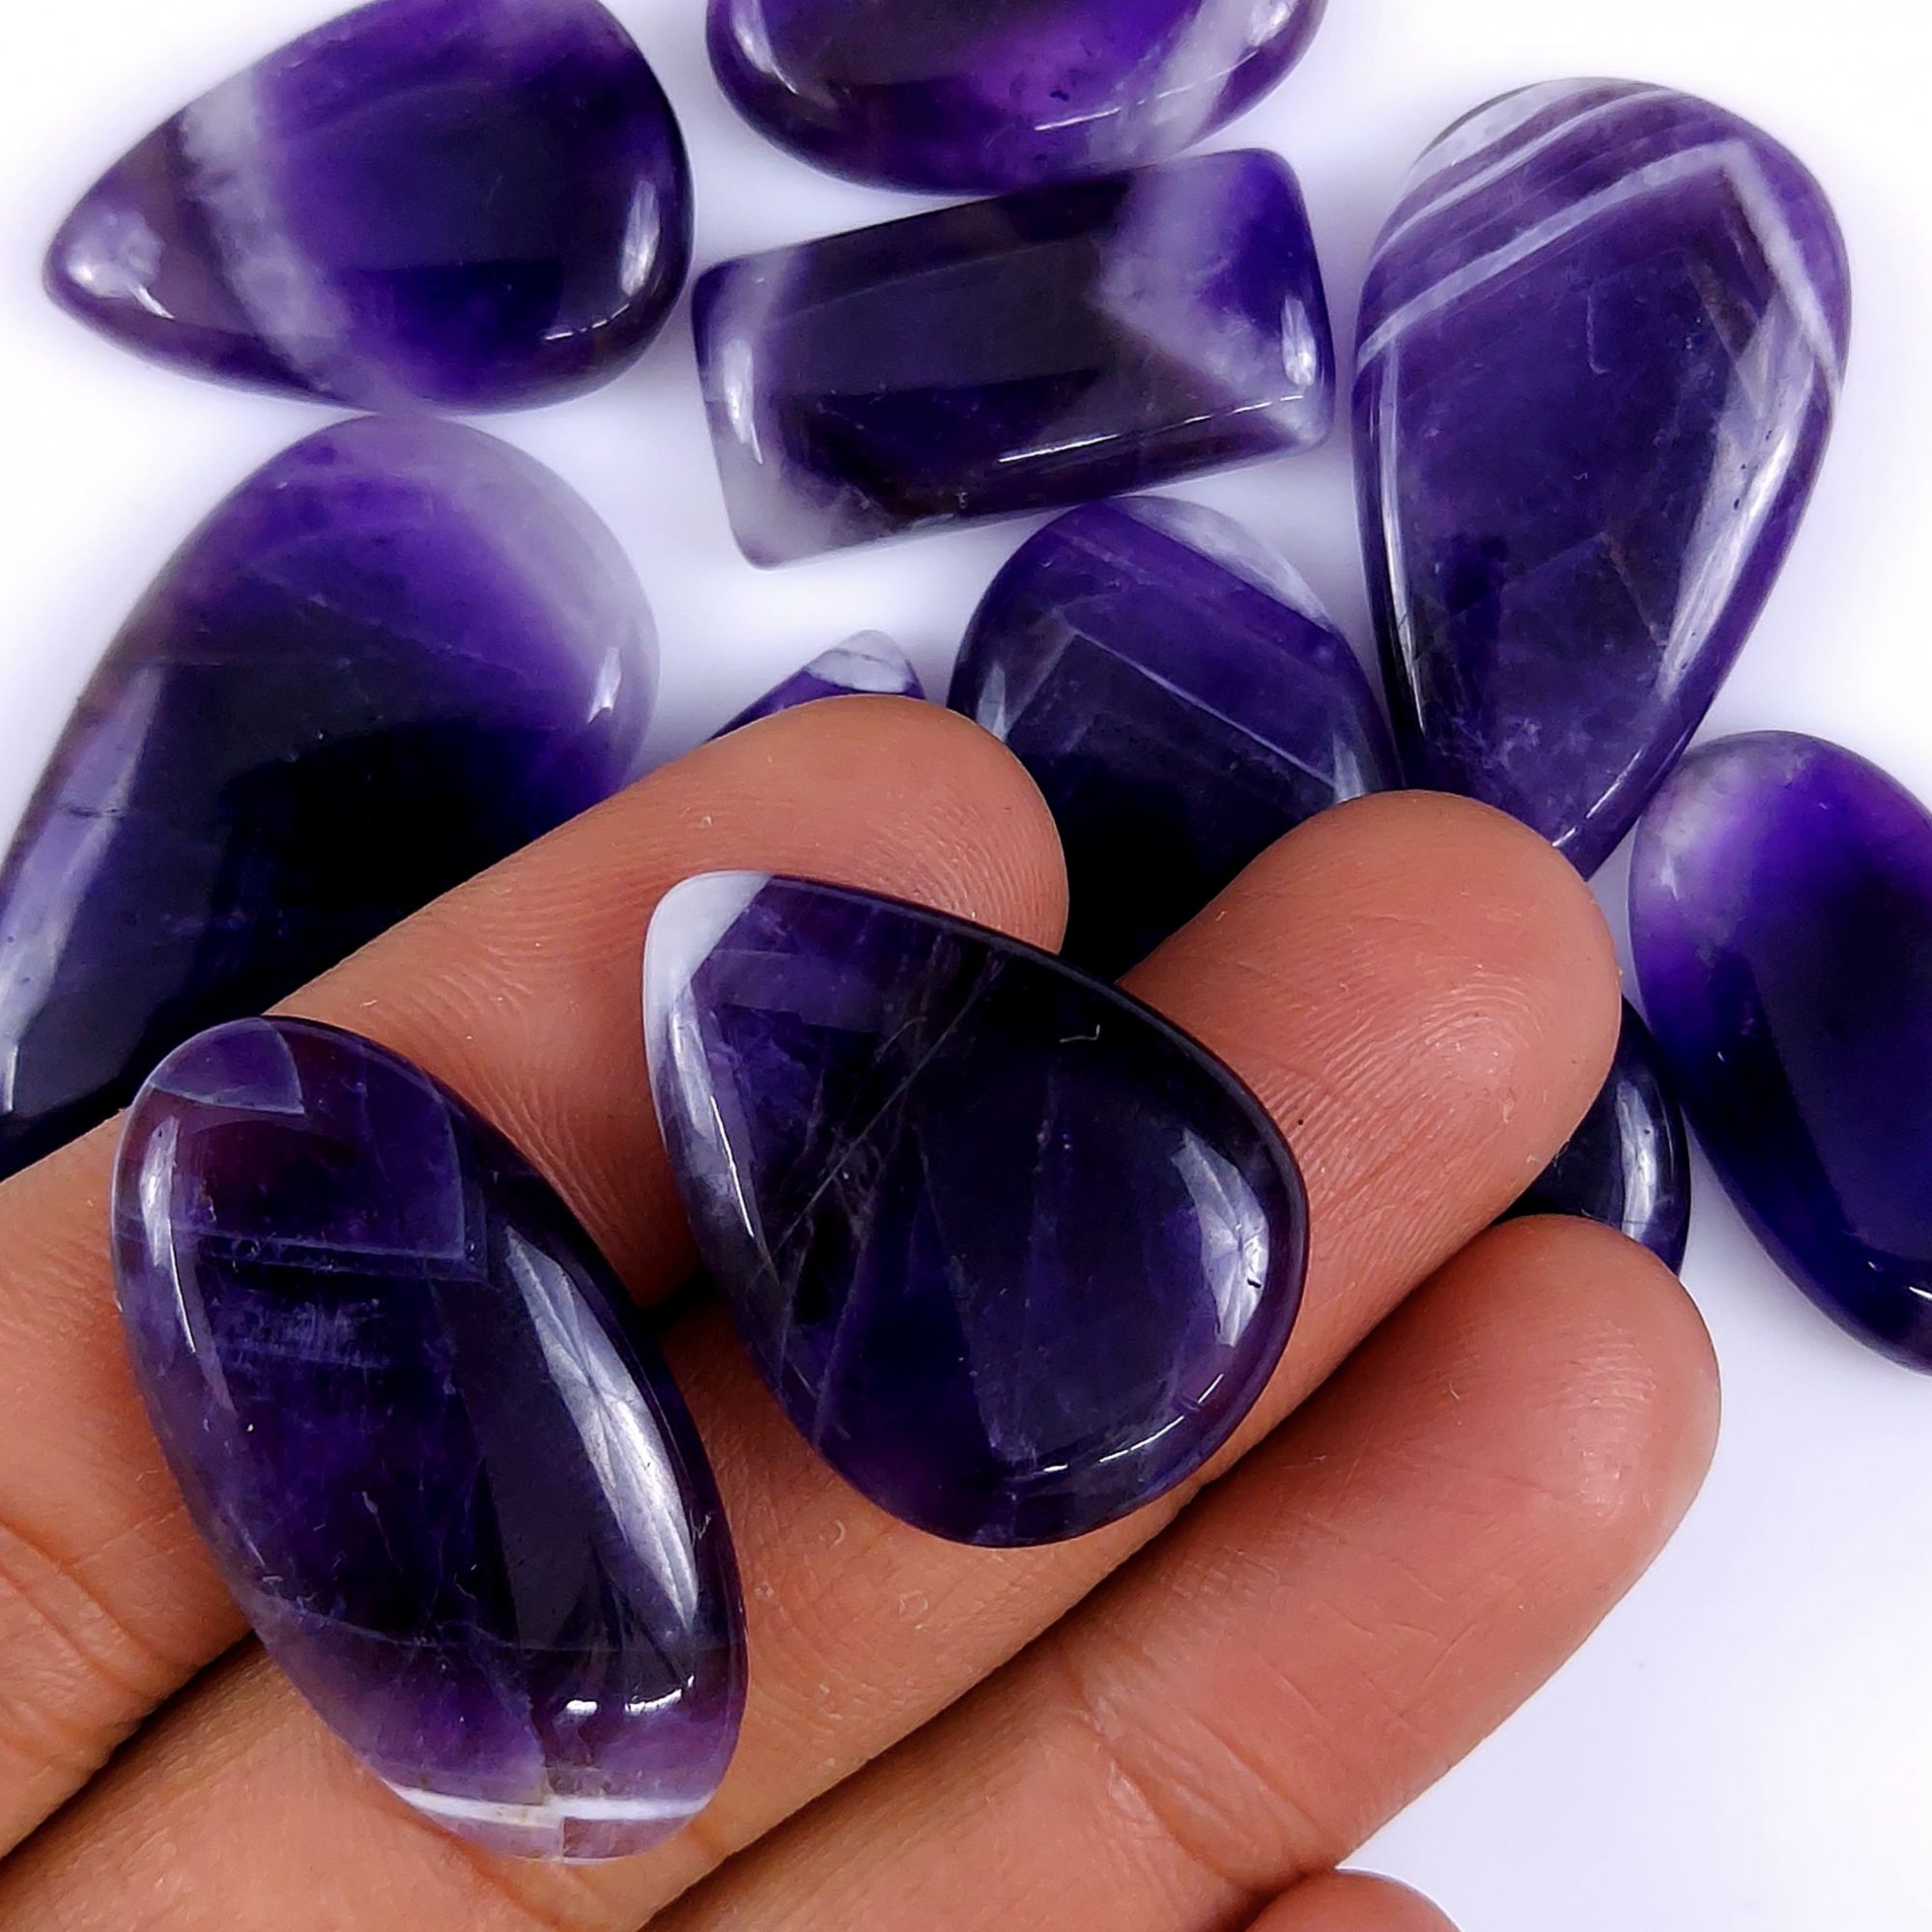 15Pcs 355Cts Natural Amethyst Cabochon lot Gemstone Purple Crystal Mix Shape Loose Gemstone beads for jewelry Making 38x20 20x15mm #7504